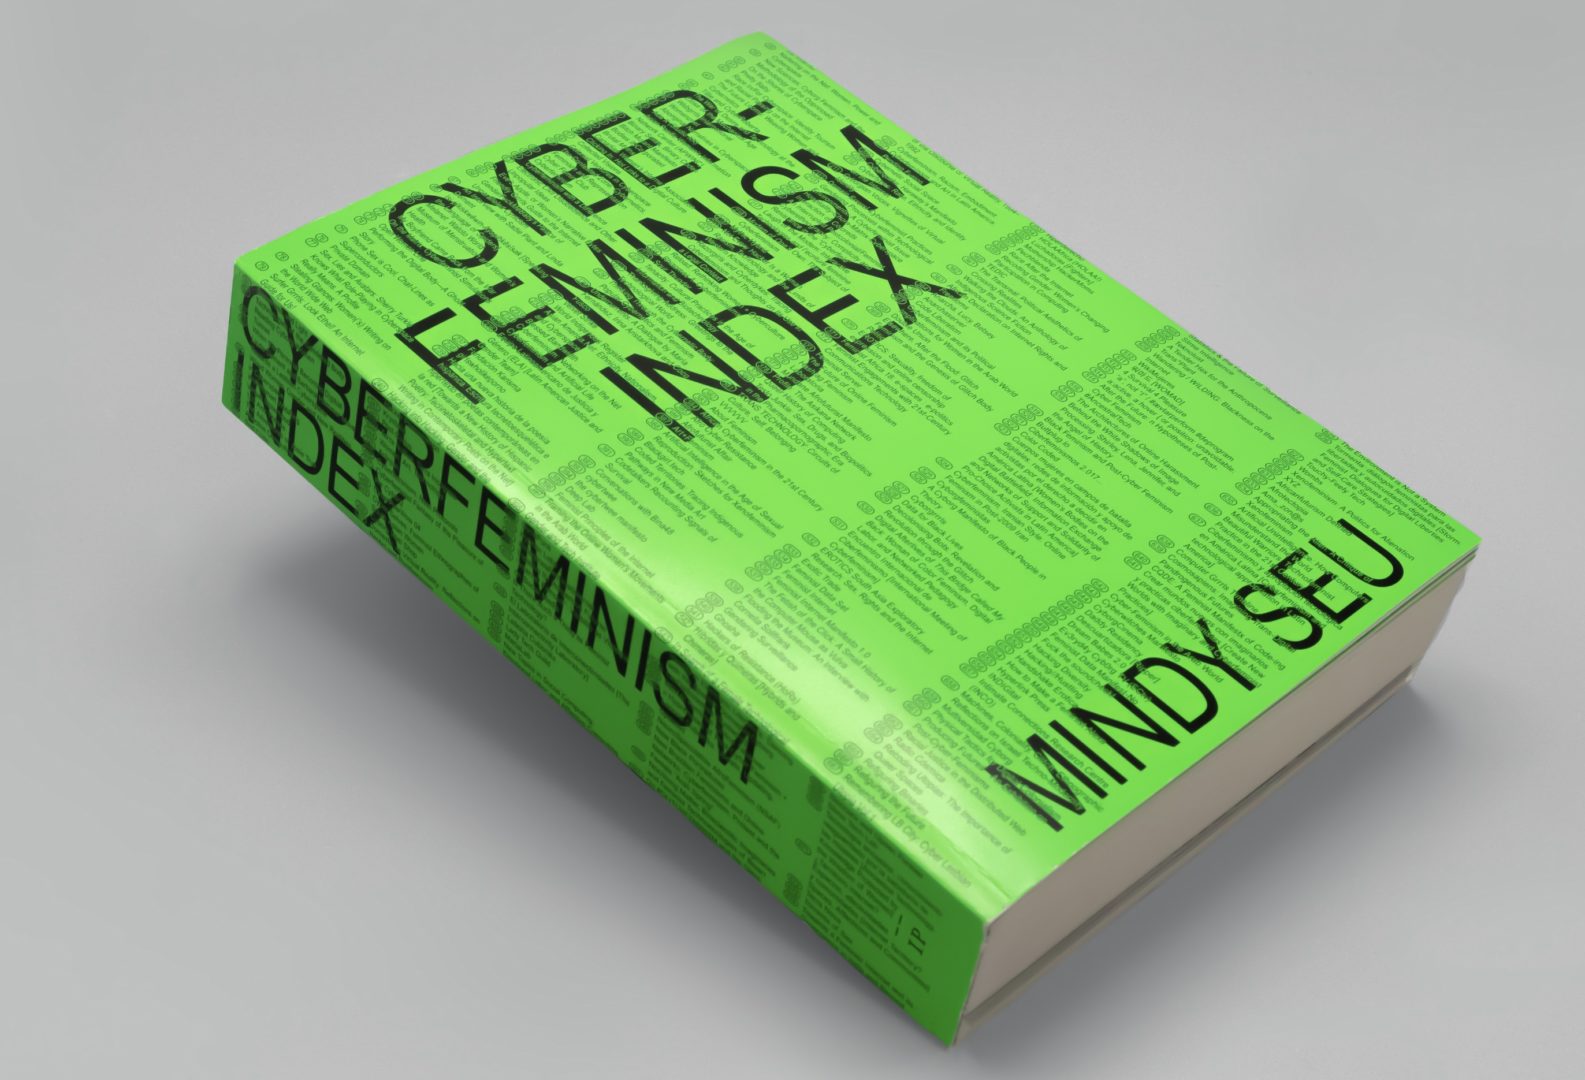 A photograph of a thick green book with the title "Cyberfeminism Index" by Mindy Seu.